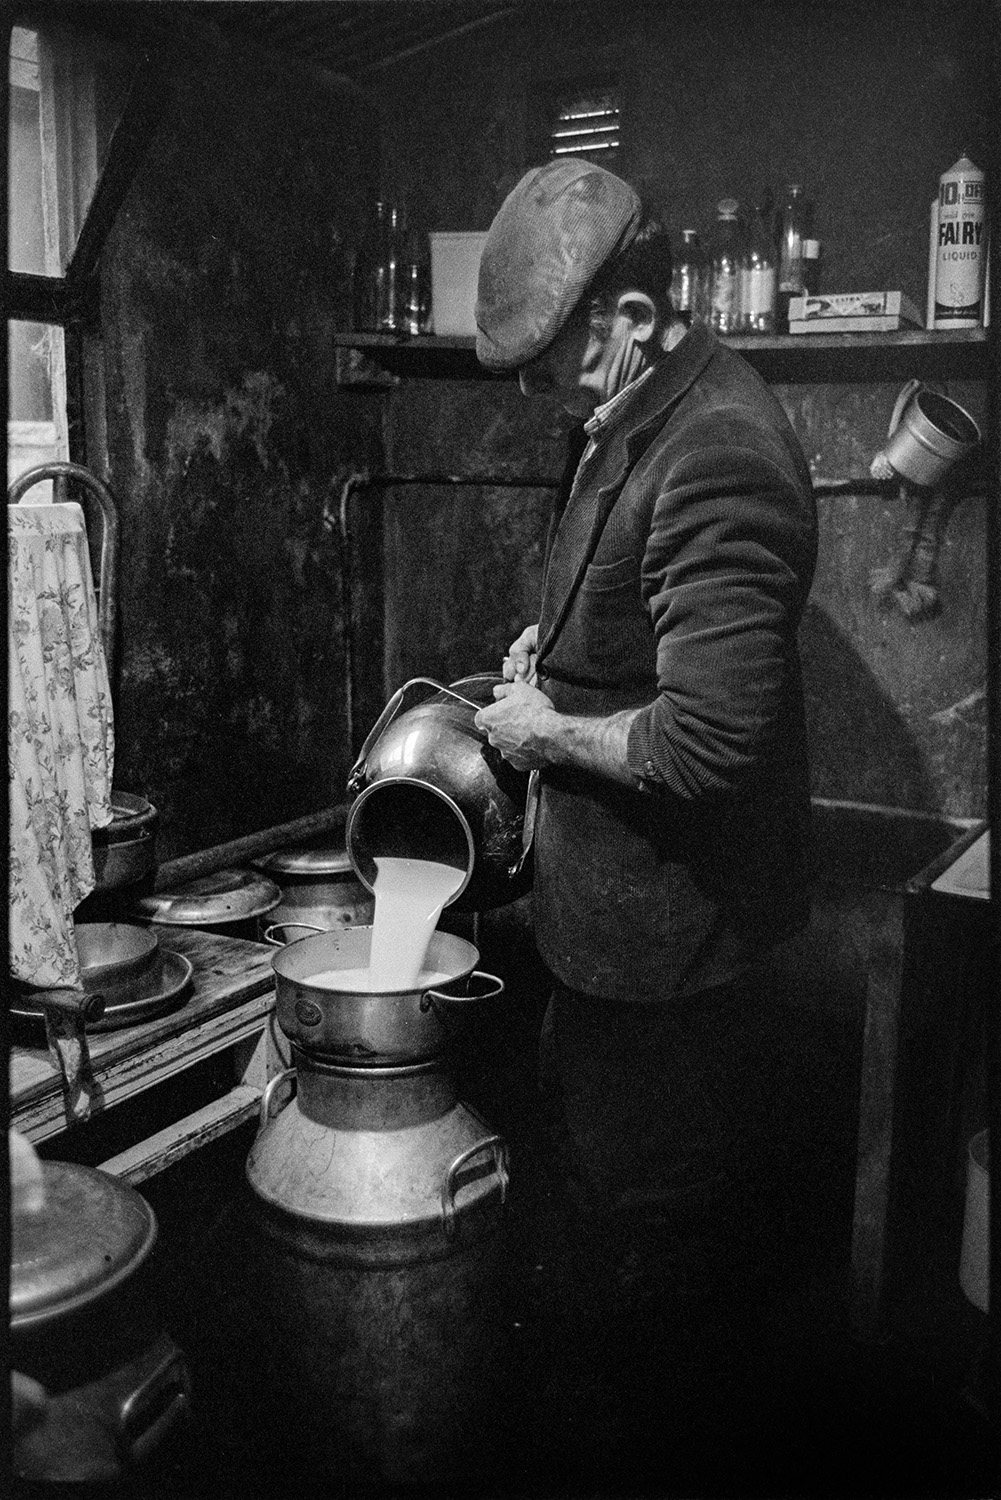 Farmer filling milk churn in dairy. 
[Jim Woolacott filling a milk churn from a smller churn in the dairy at Verdun, Atherington. Other milk churns are visible and a shelf with various bottles can be seen in the background.]